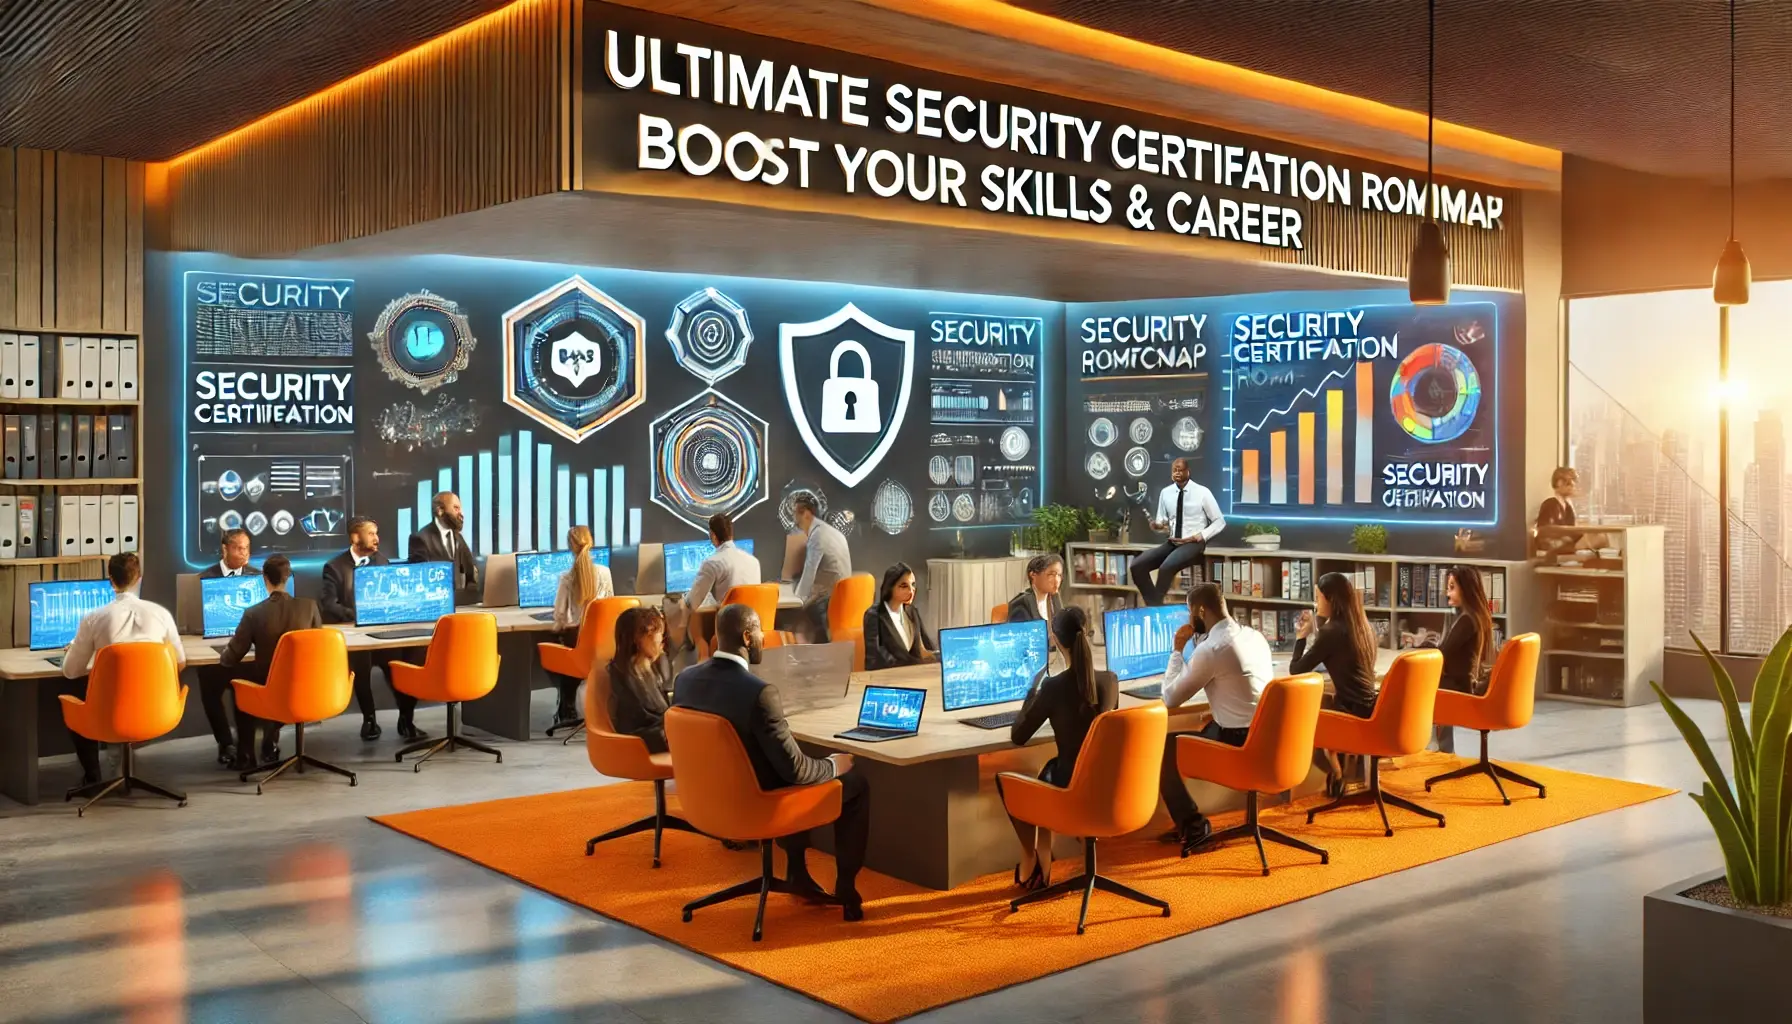 Ultimate Security Certification Roadmap: Boost Your Skills & Career